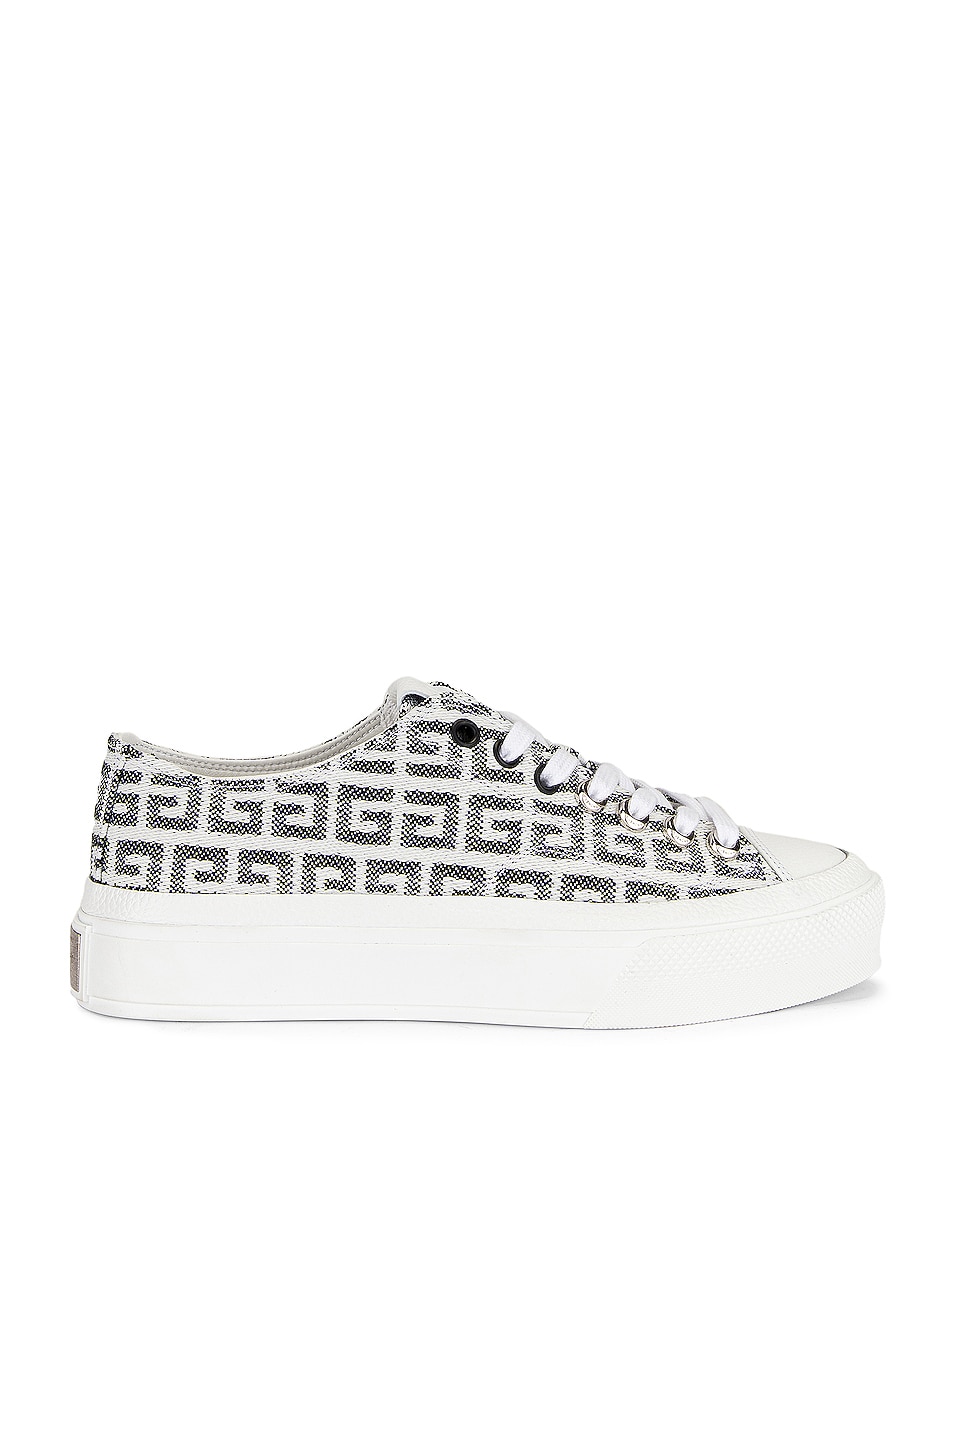 Image 1 of Givenchy City Low Sneakers in Black & White